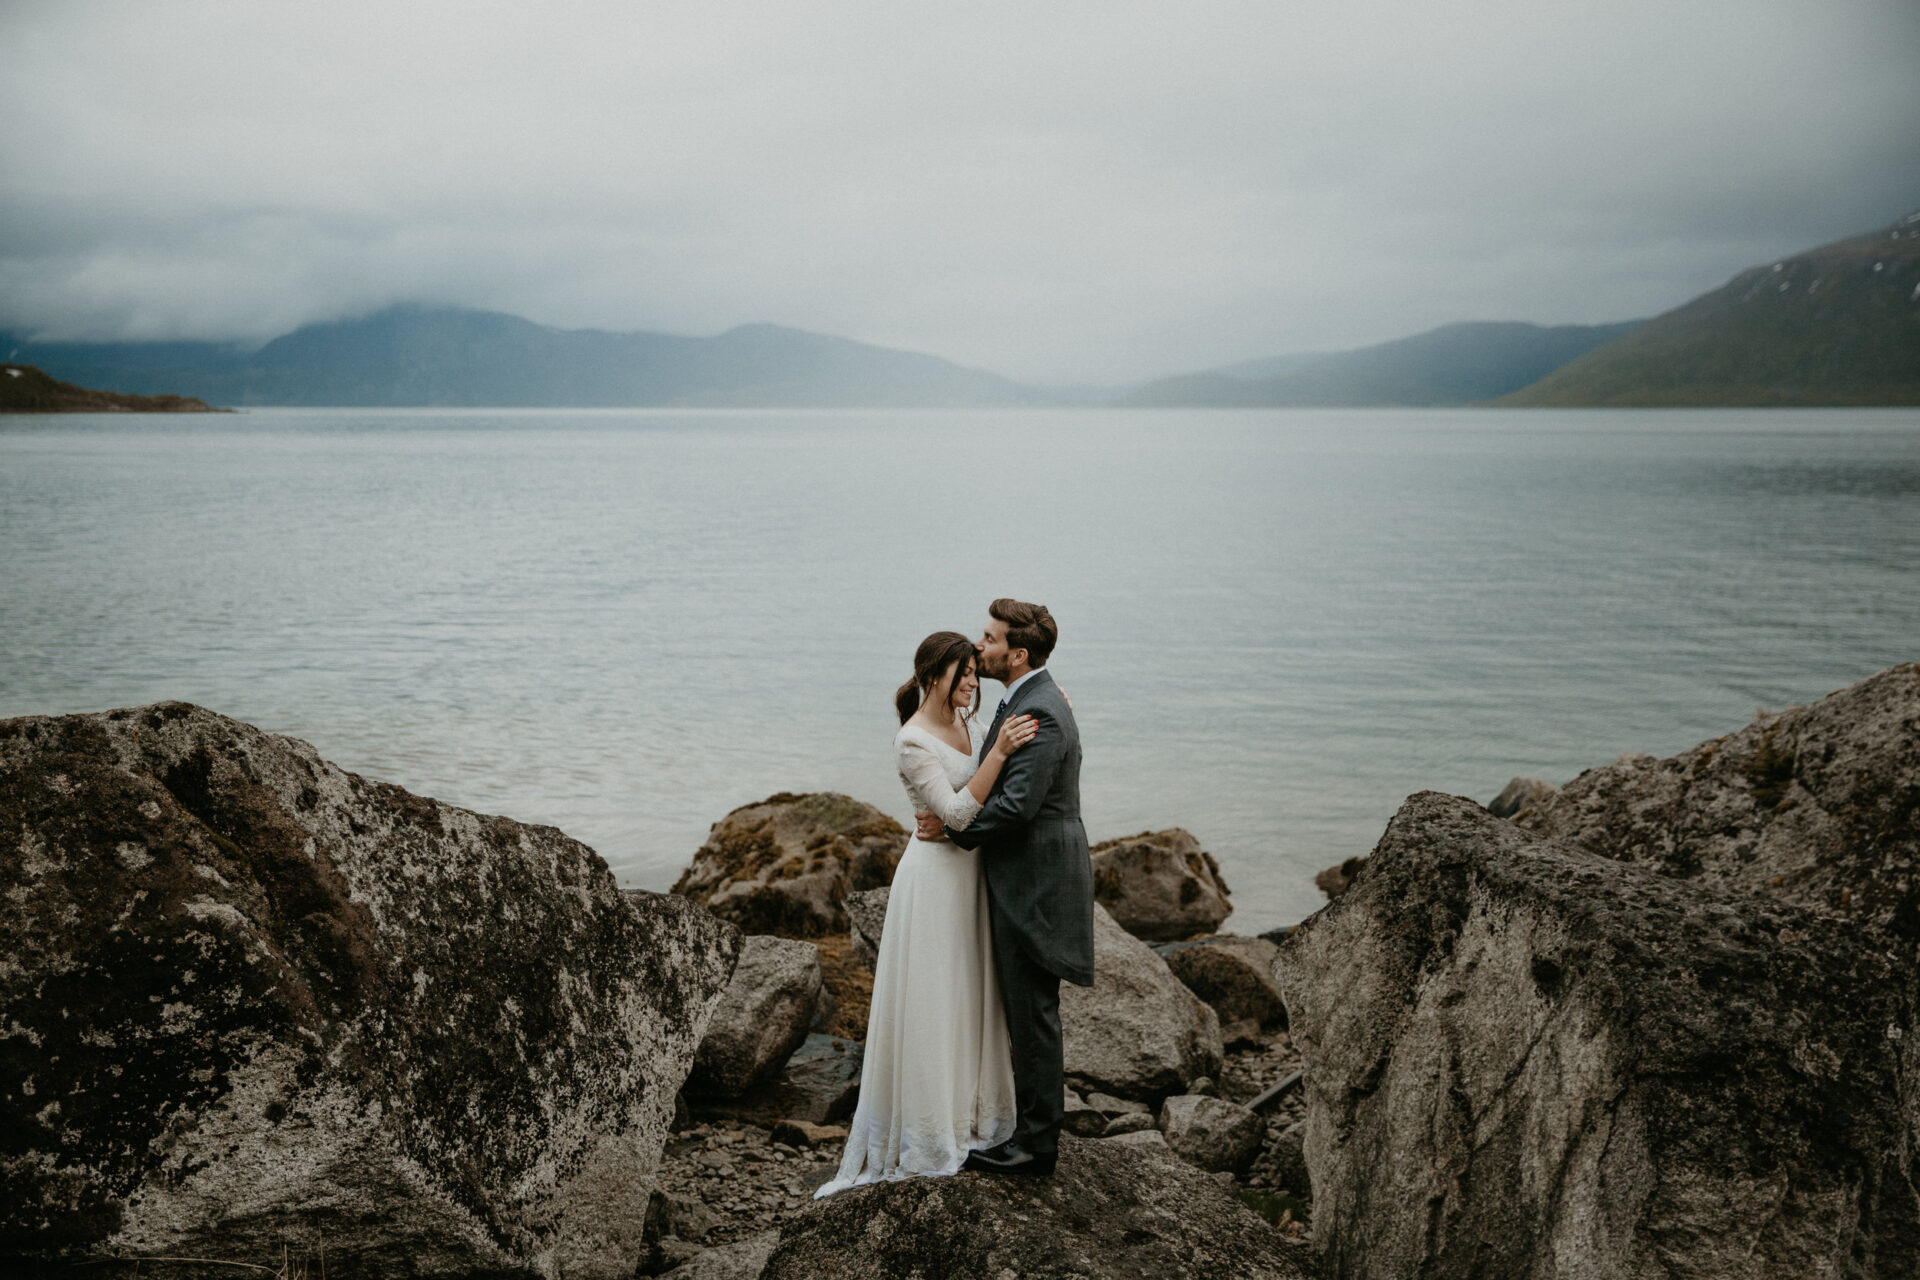 Norway's Fjords as Wedding Photoshoot Setting